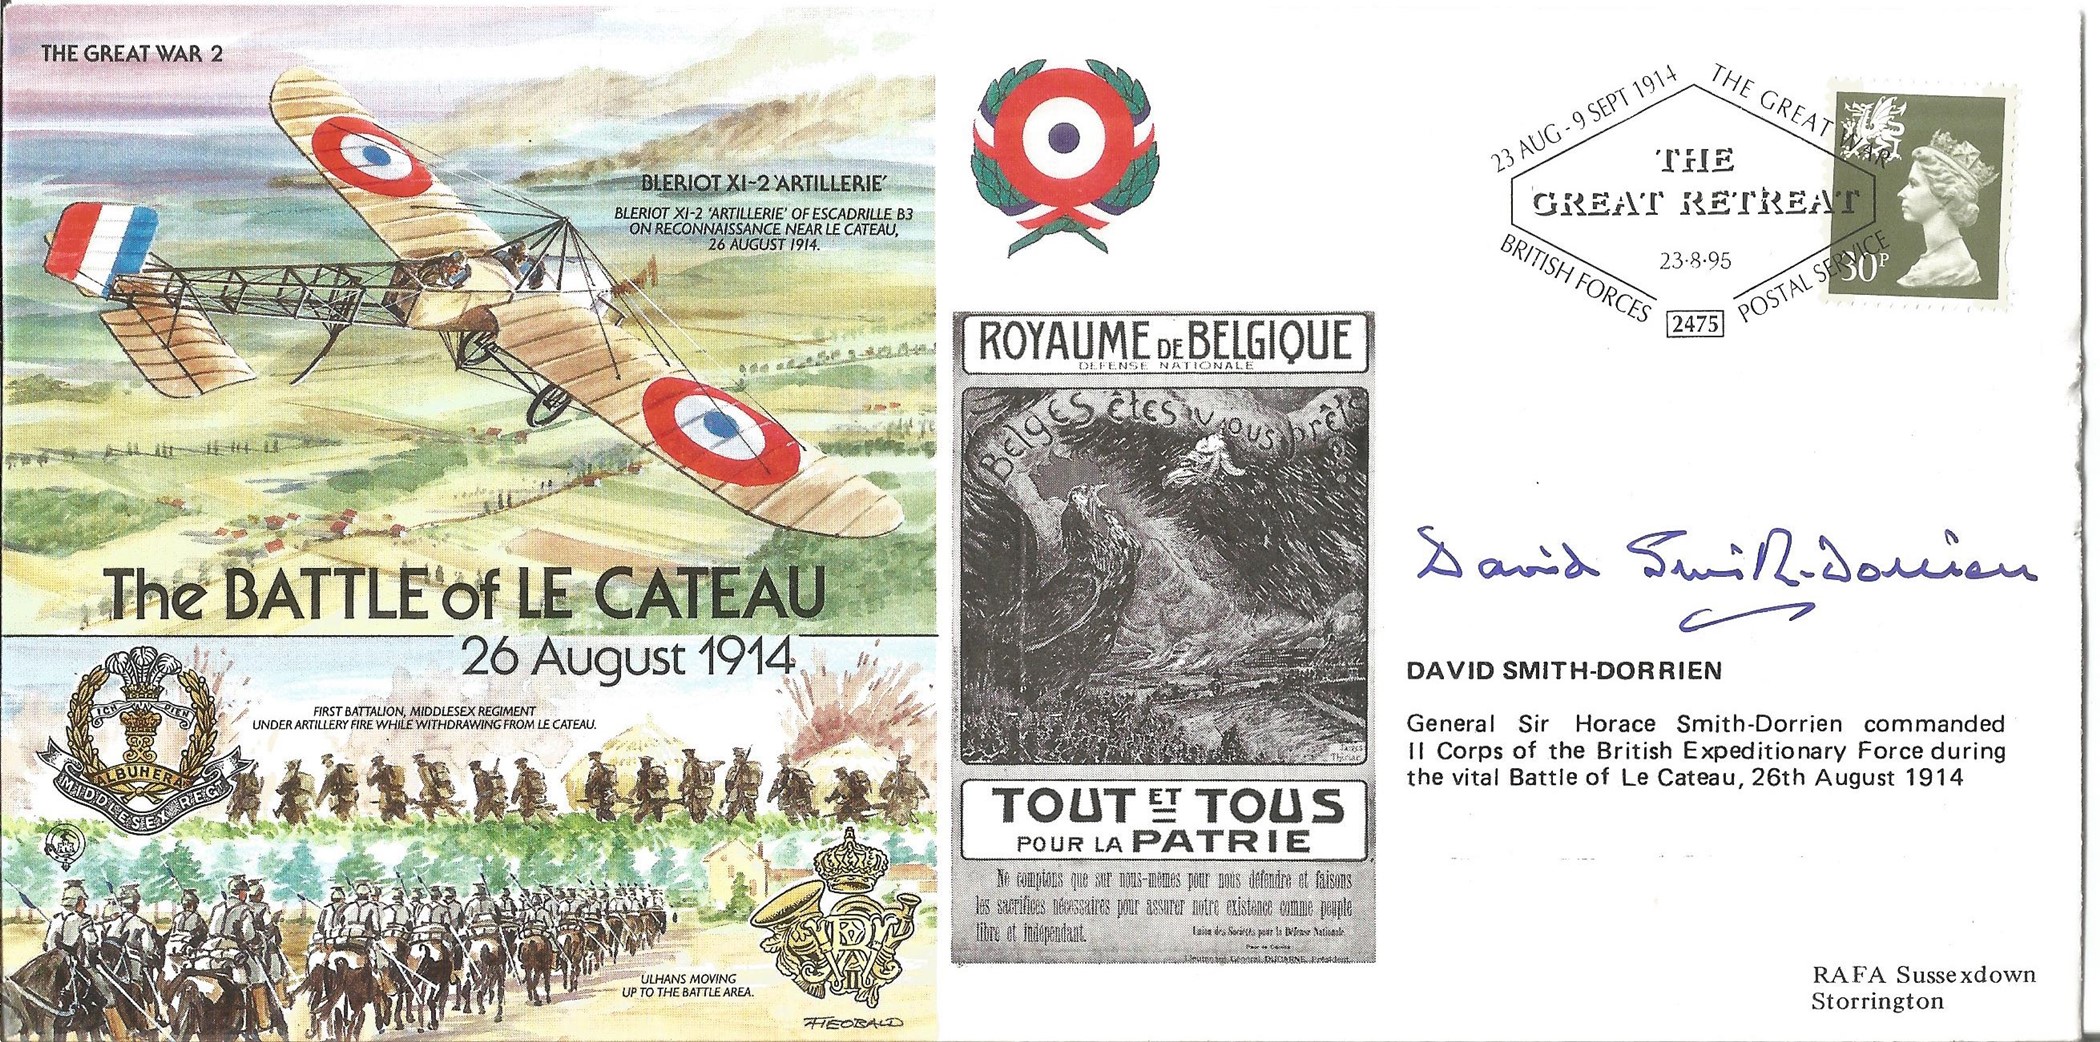 David Smith-Dorrien signed FDC The Battle of Cateau 26 August 1914 No. 370 of 500. Flown in